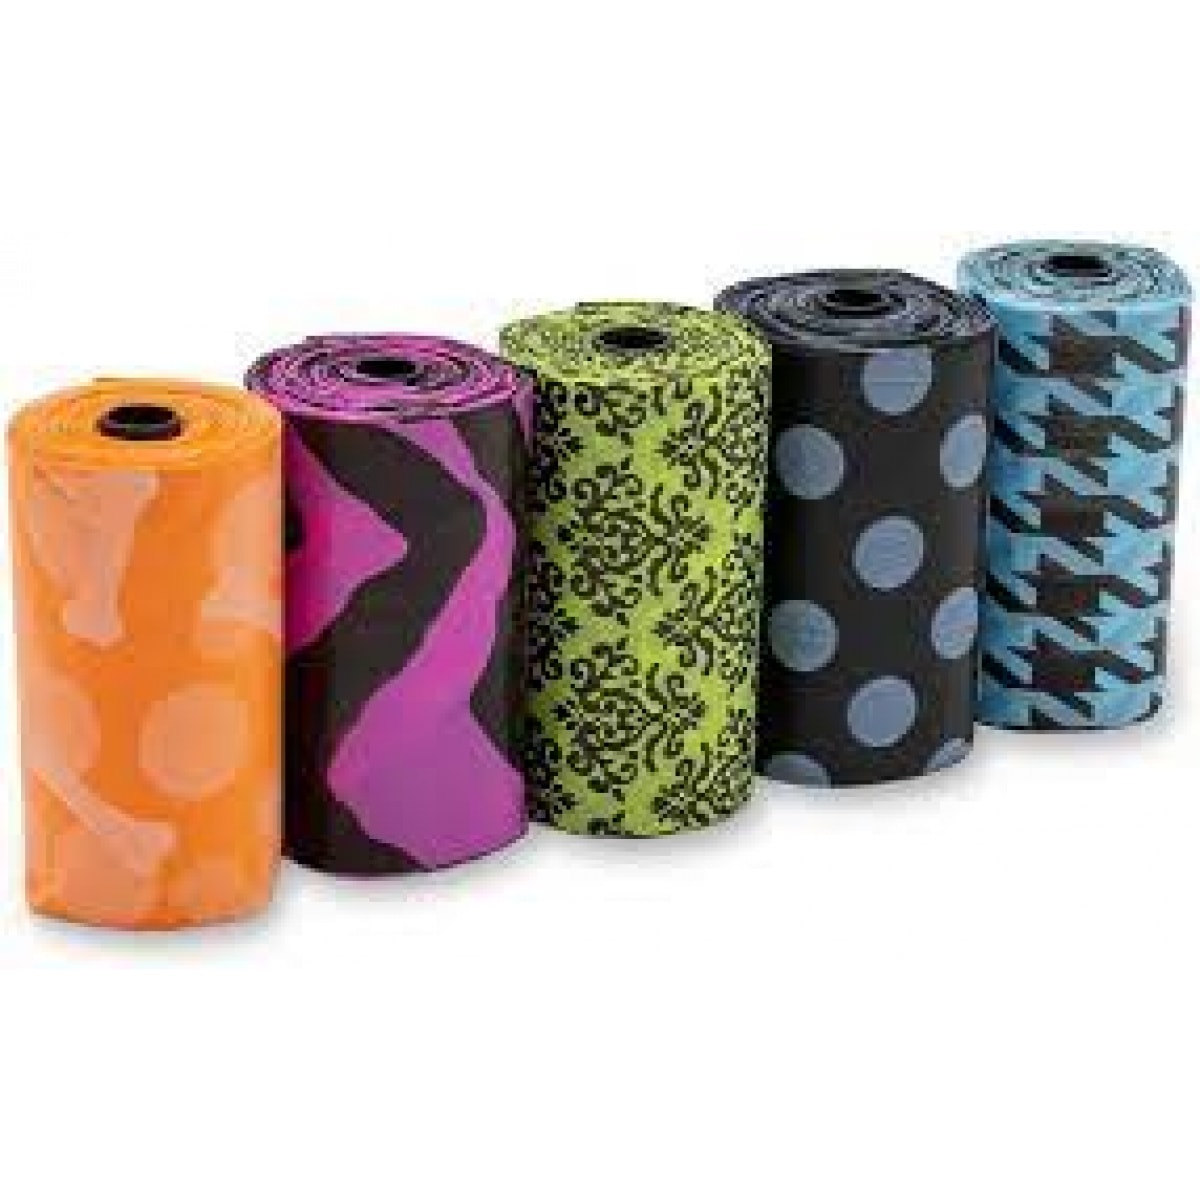 Bags on Board Refills – Patterned – Pawfect Supplies Ltd Product Image